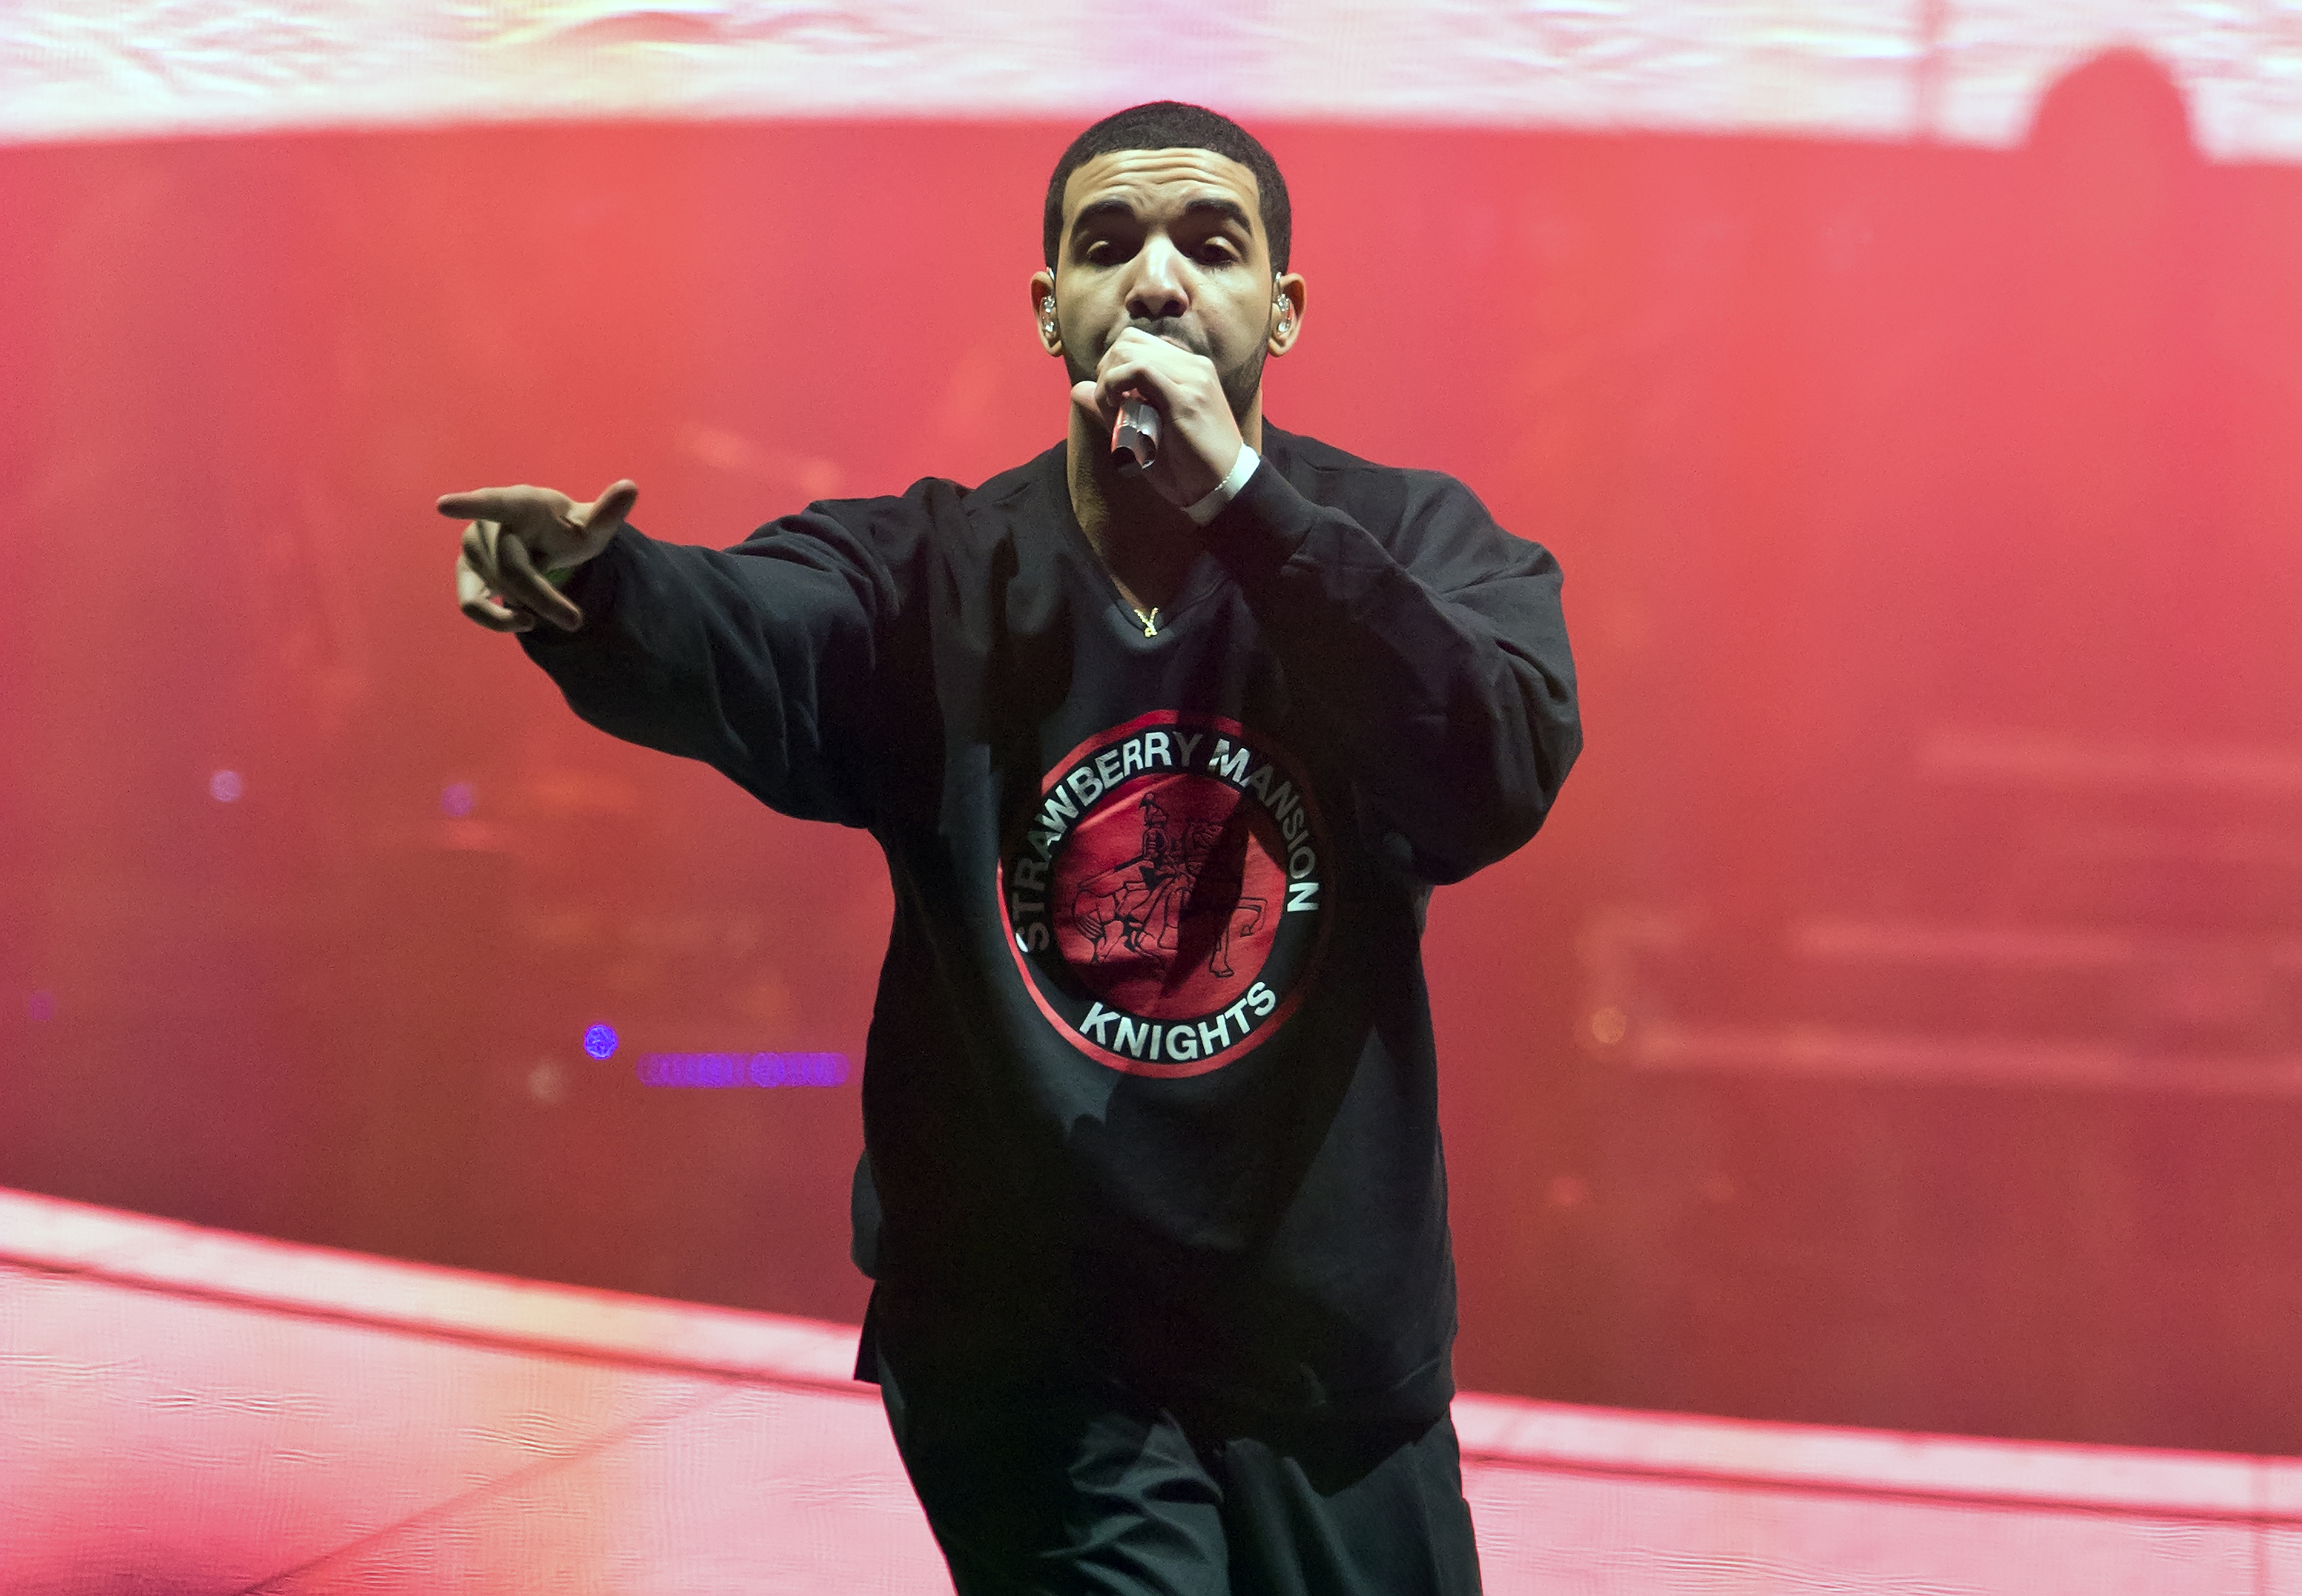 Drake performing on stage wearing a graphic t-shirt